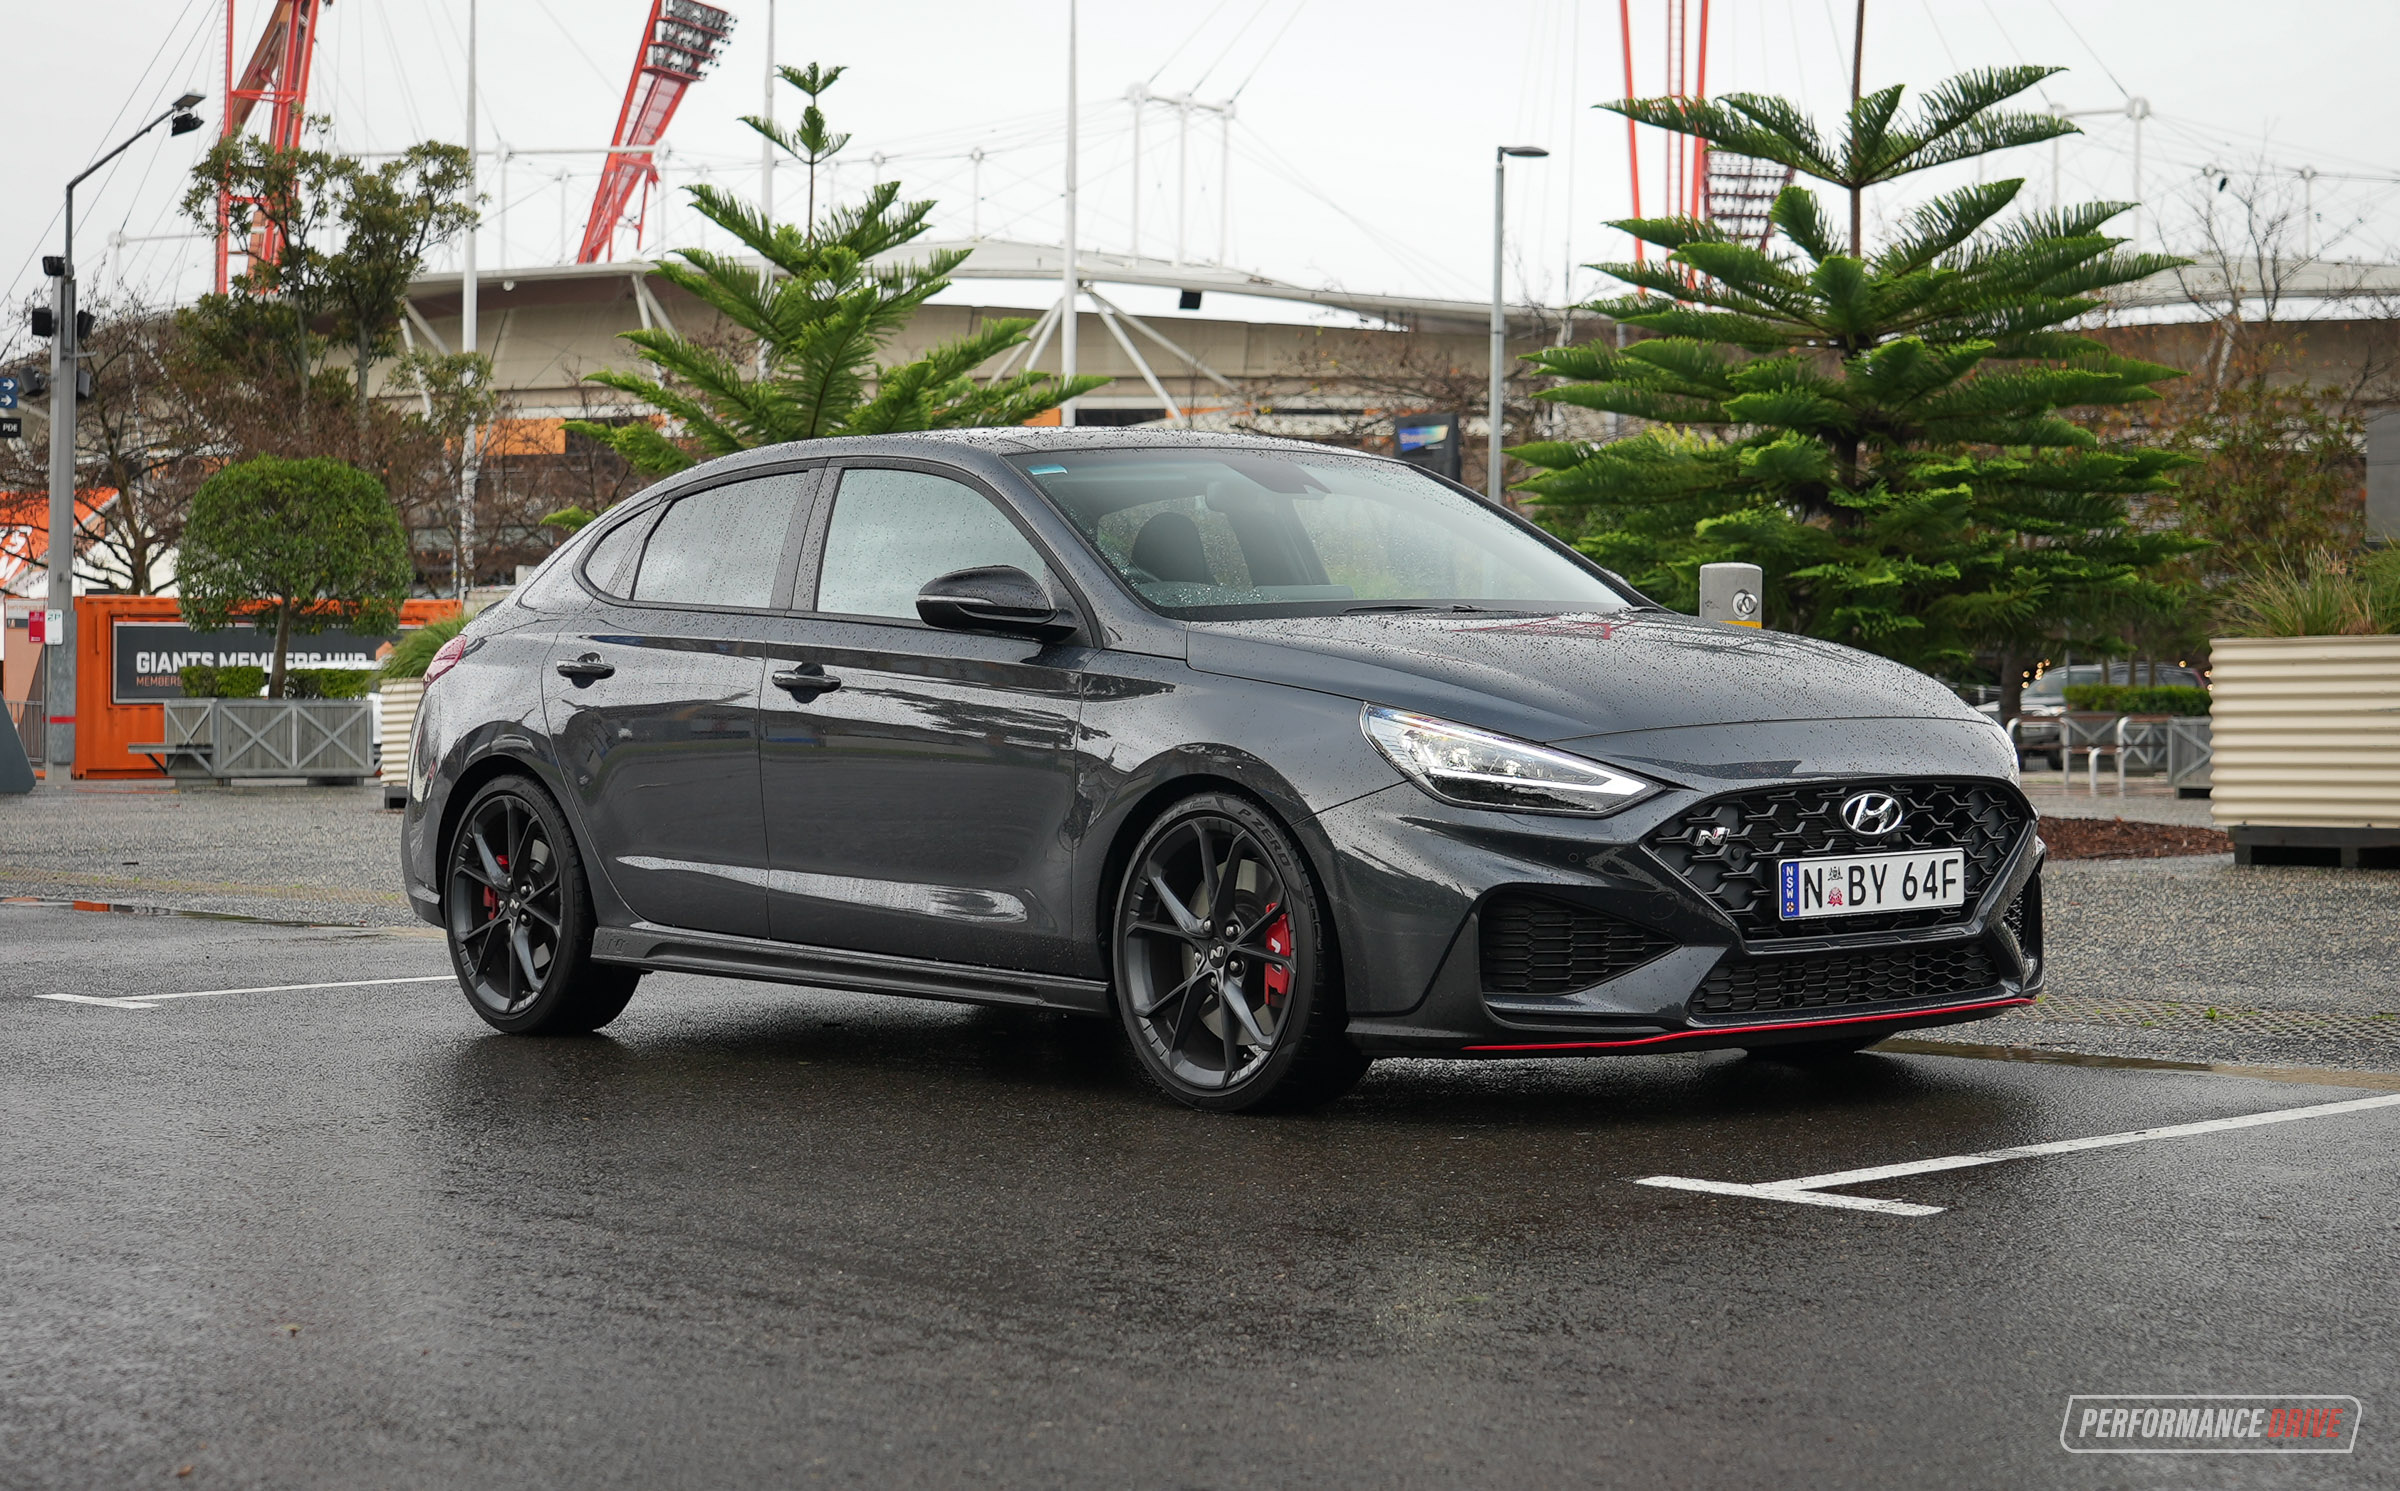 2022 Hyundai i30 N Fastback Limited Edition review (video)